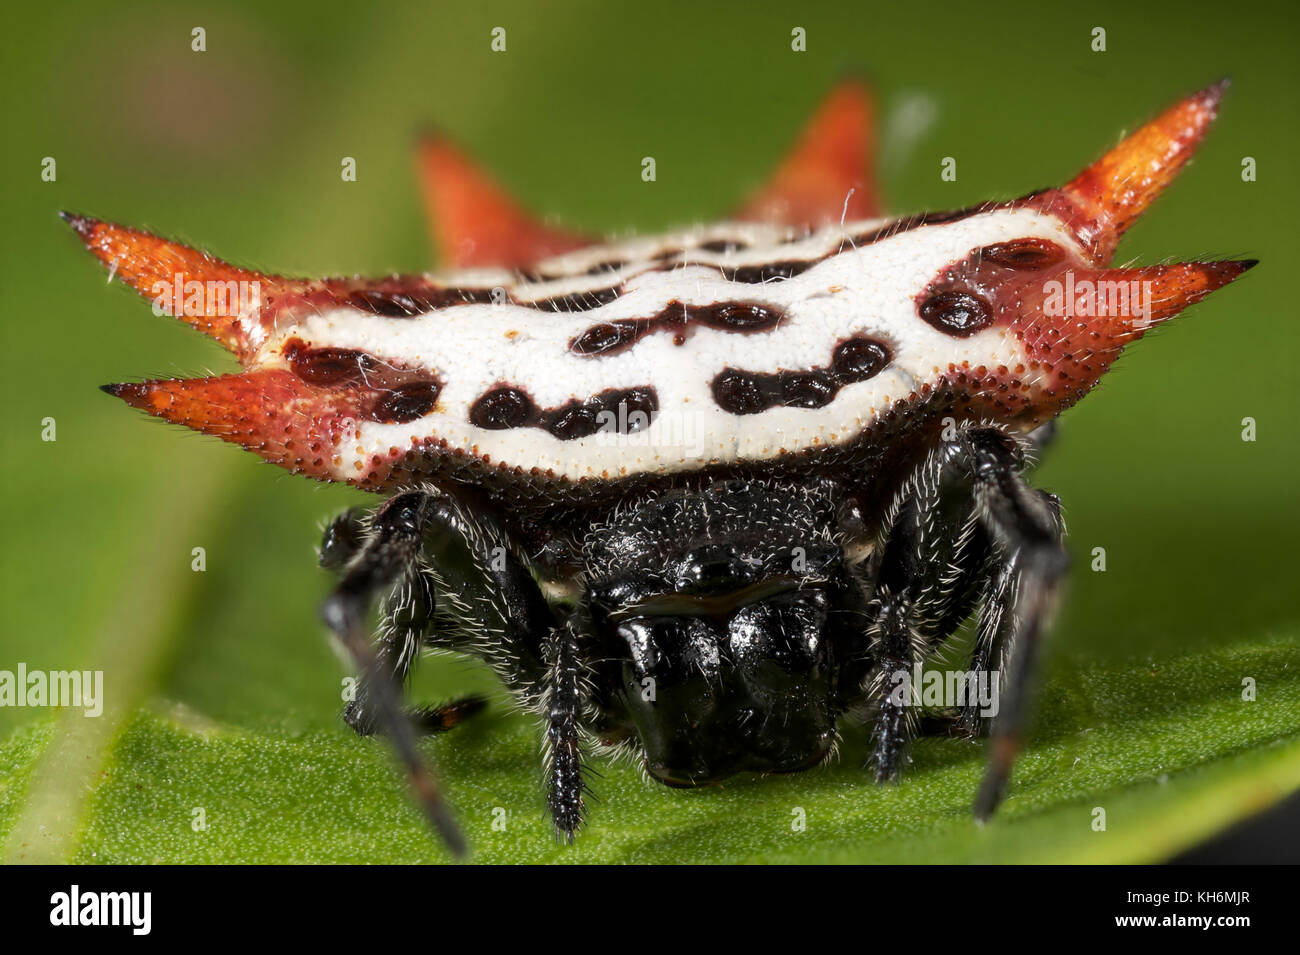 Spiny orb-weaver spider, Gasteracantha cancriformis Stock Photo